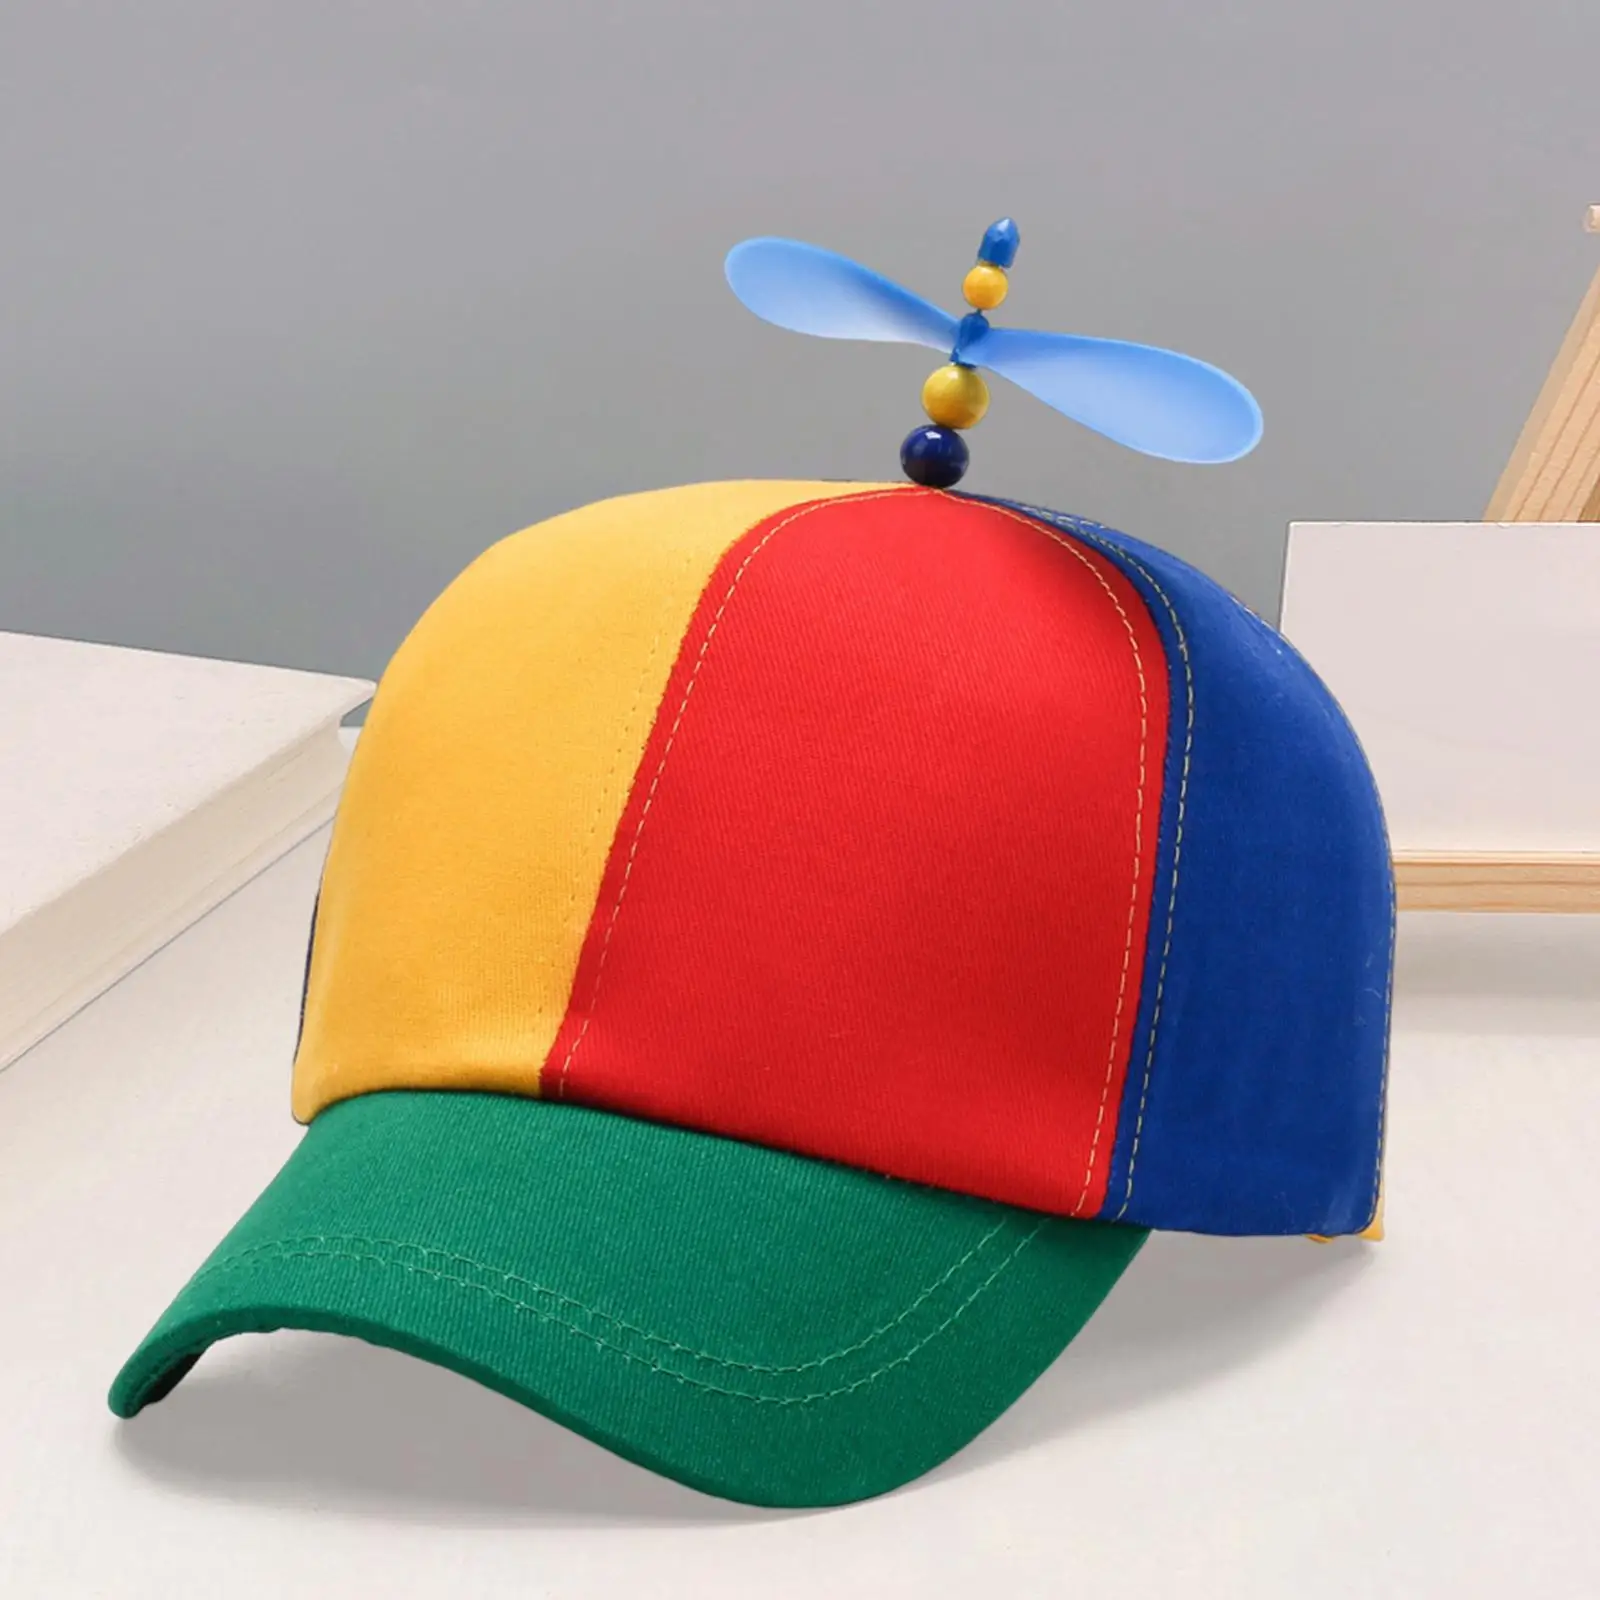 Propeller Hat, Brightly Color with Propeller On Top Spinning Propeller Ball Hat Adjustable Size Baseball Hat for Women Girl